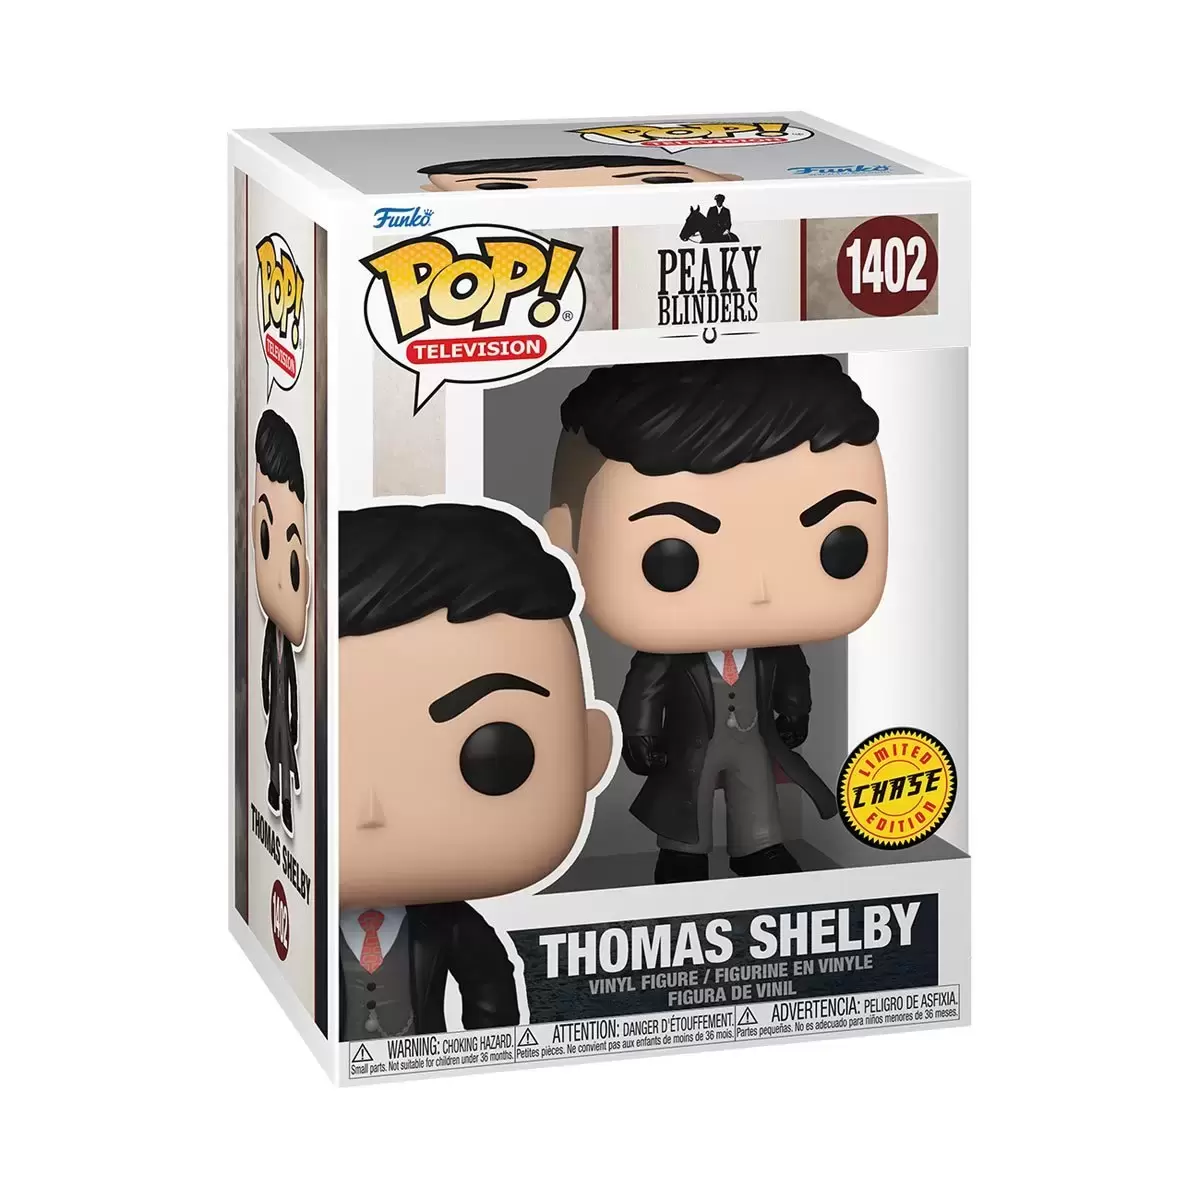 POP! Television - Peaky Blinders - Thomas Shelby Chase